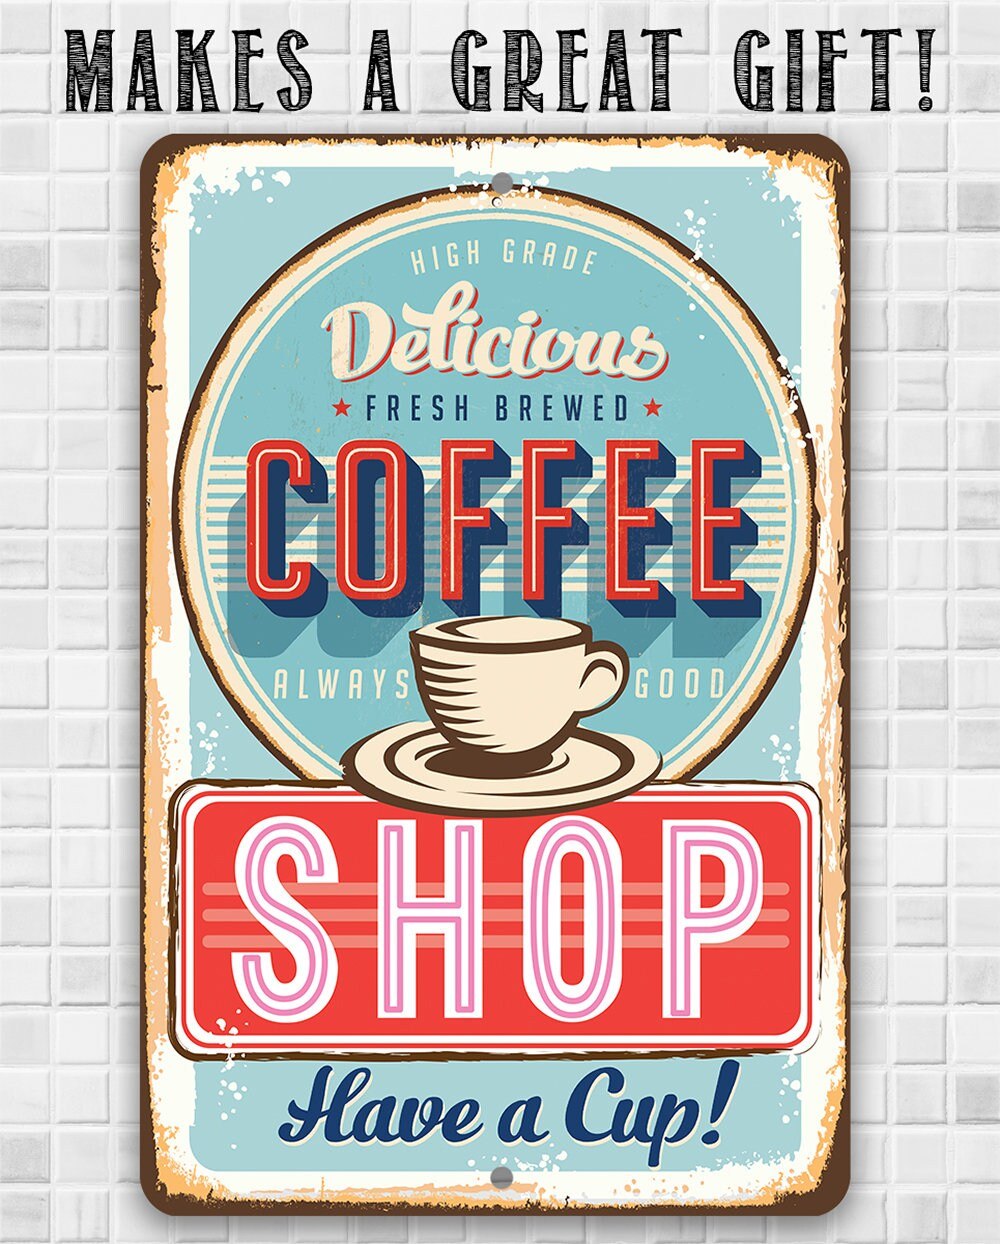 Delicious Fresh Brewed Coffee - Metal Sign Metal Sign Lone Star Art 